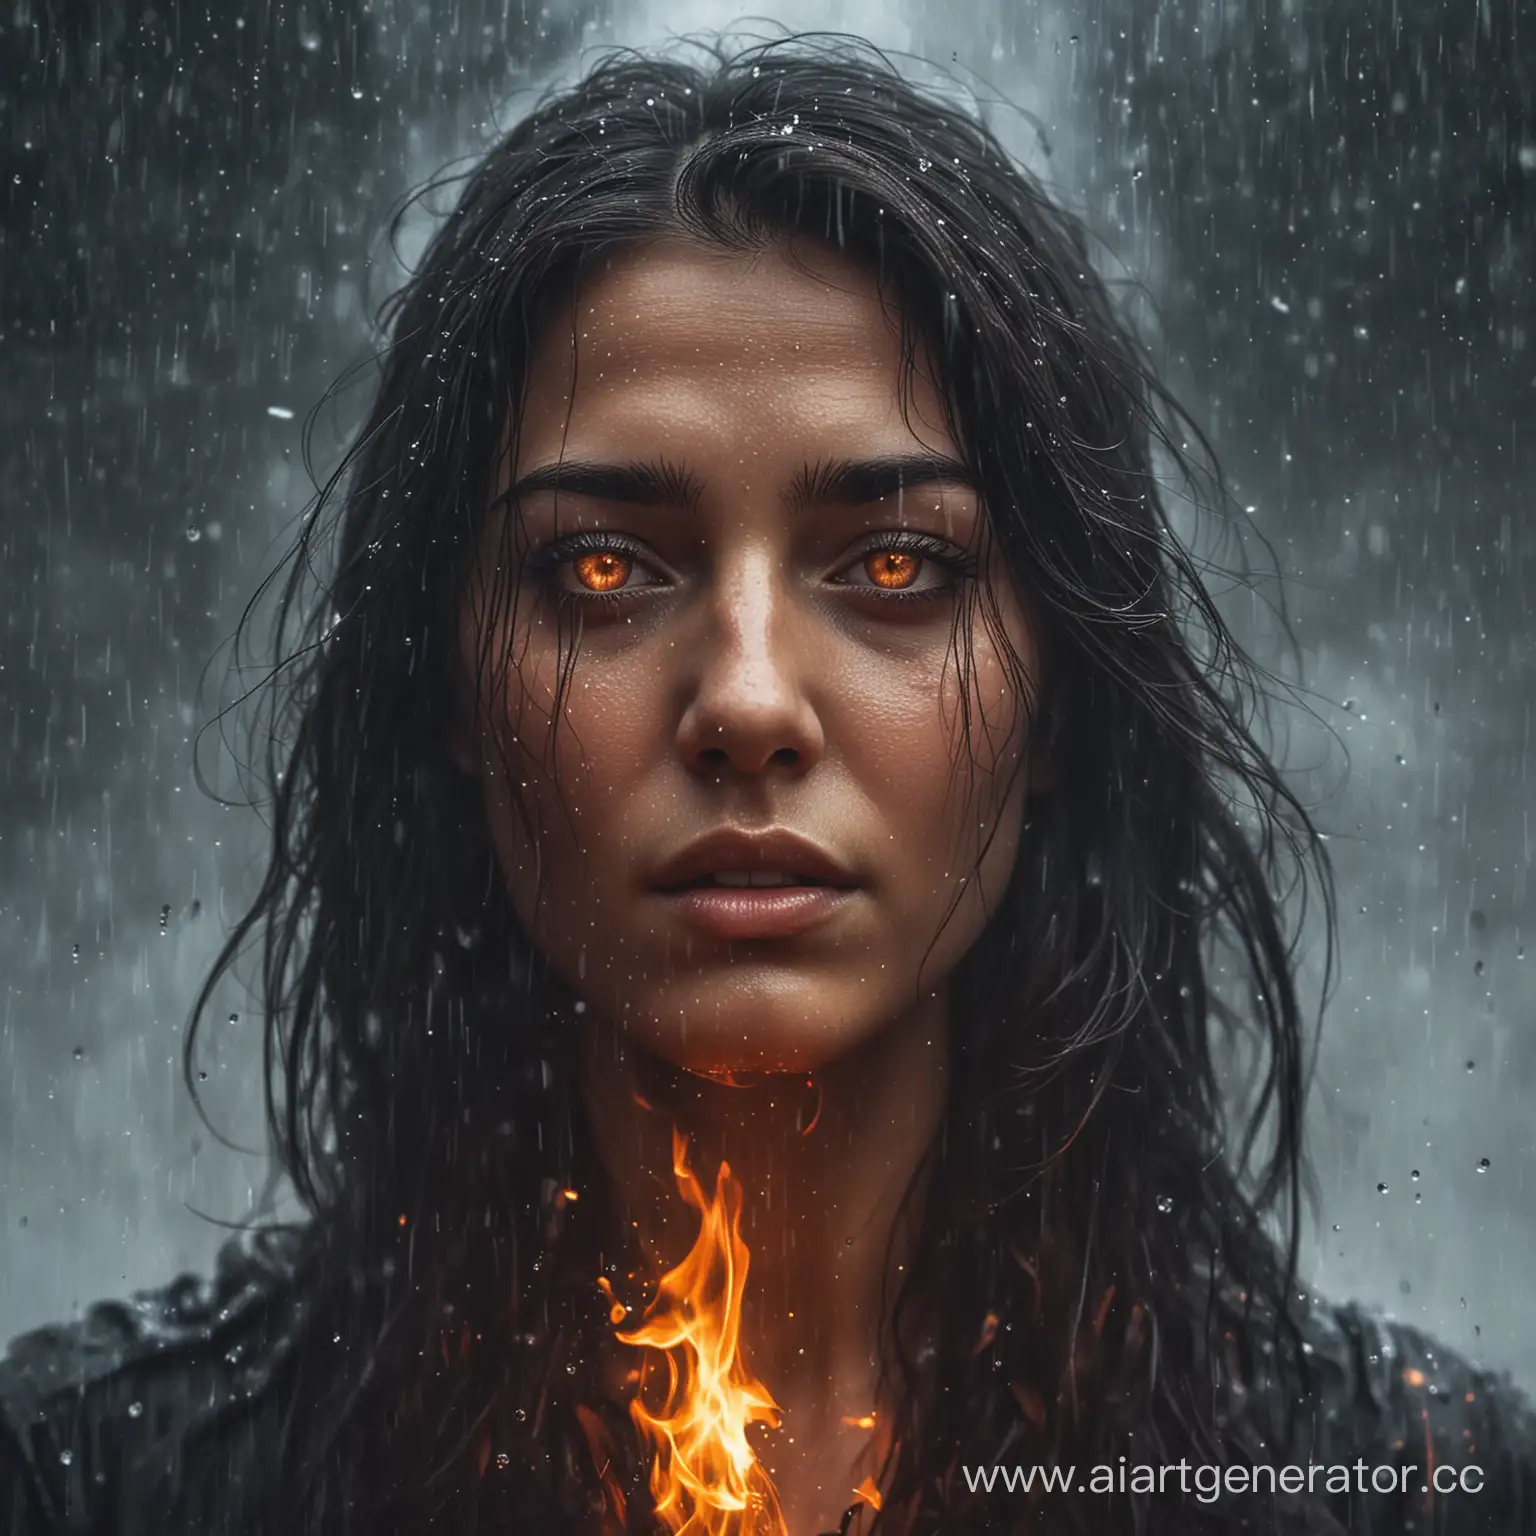 Mystical-Universe-Face-Emerging-from-Fire-and-Rain-in-the-Fog